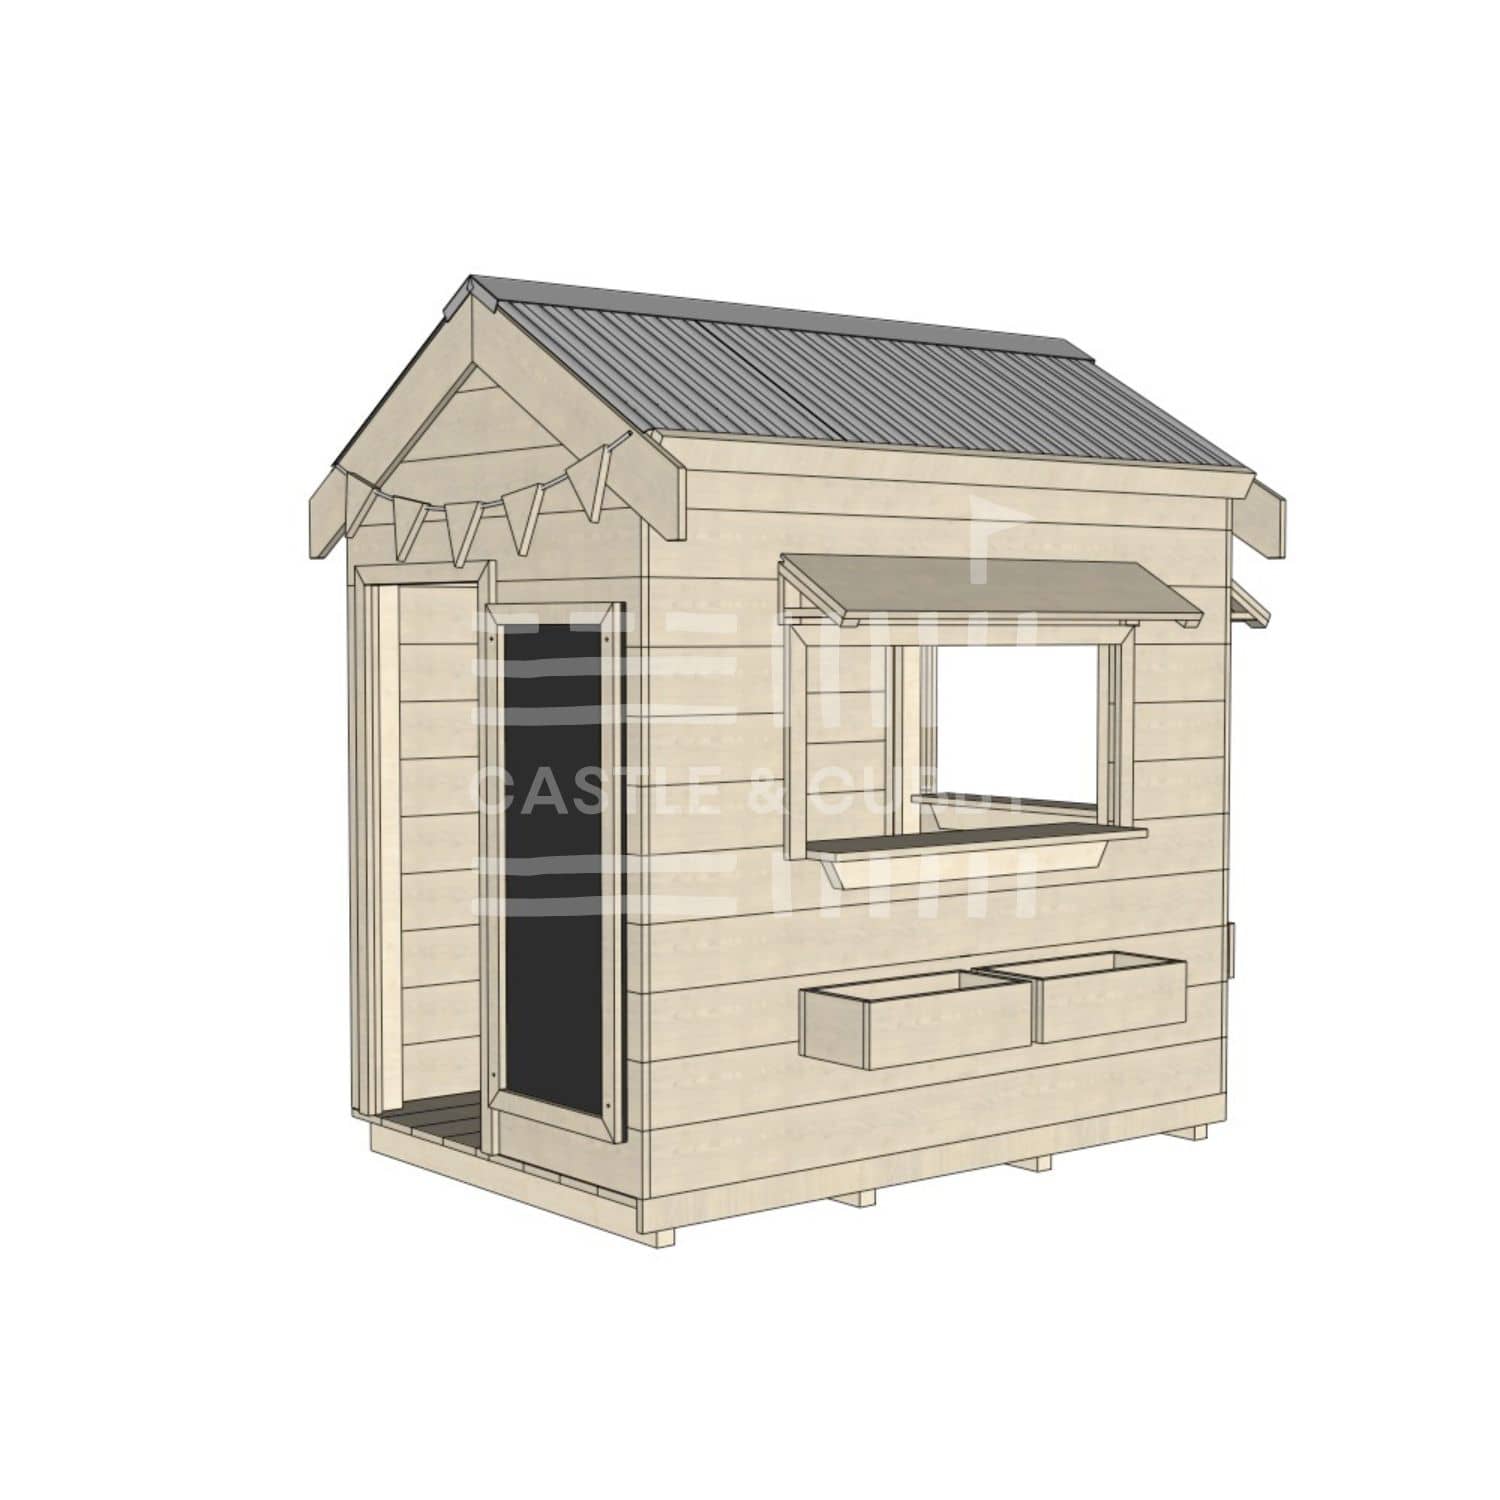 Pitched roof raw wooden cubby house commercial education little rectangle accessories